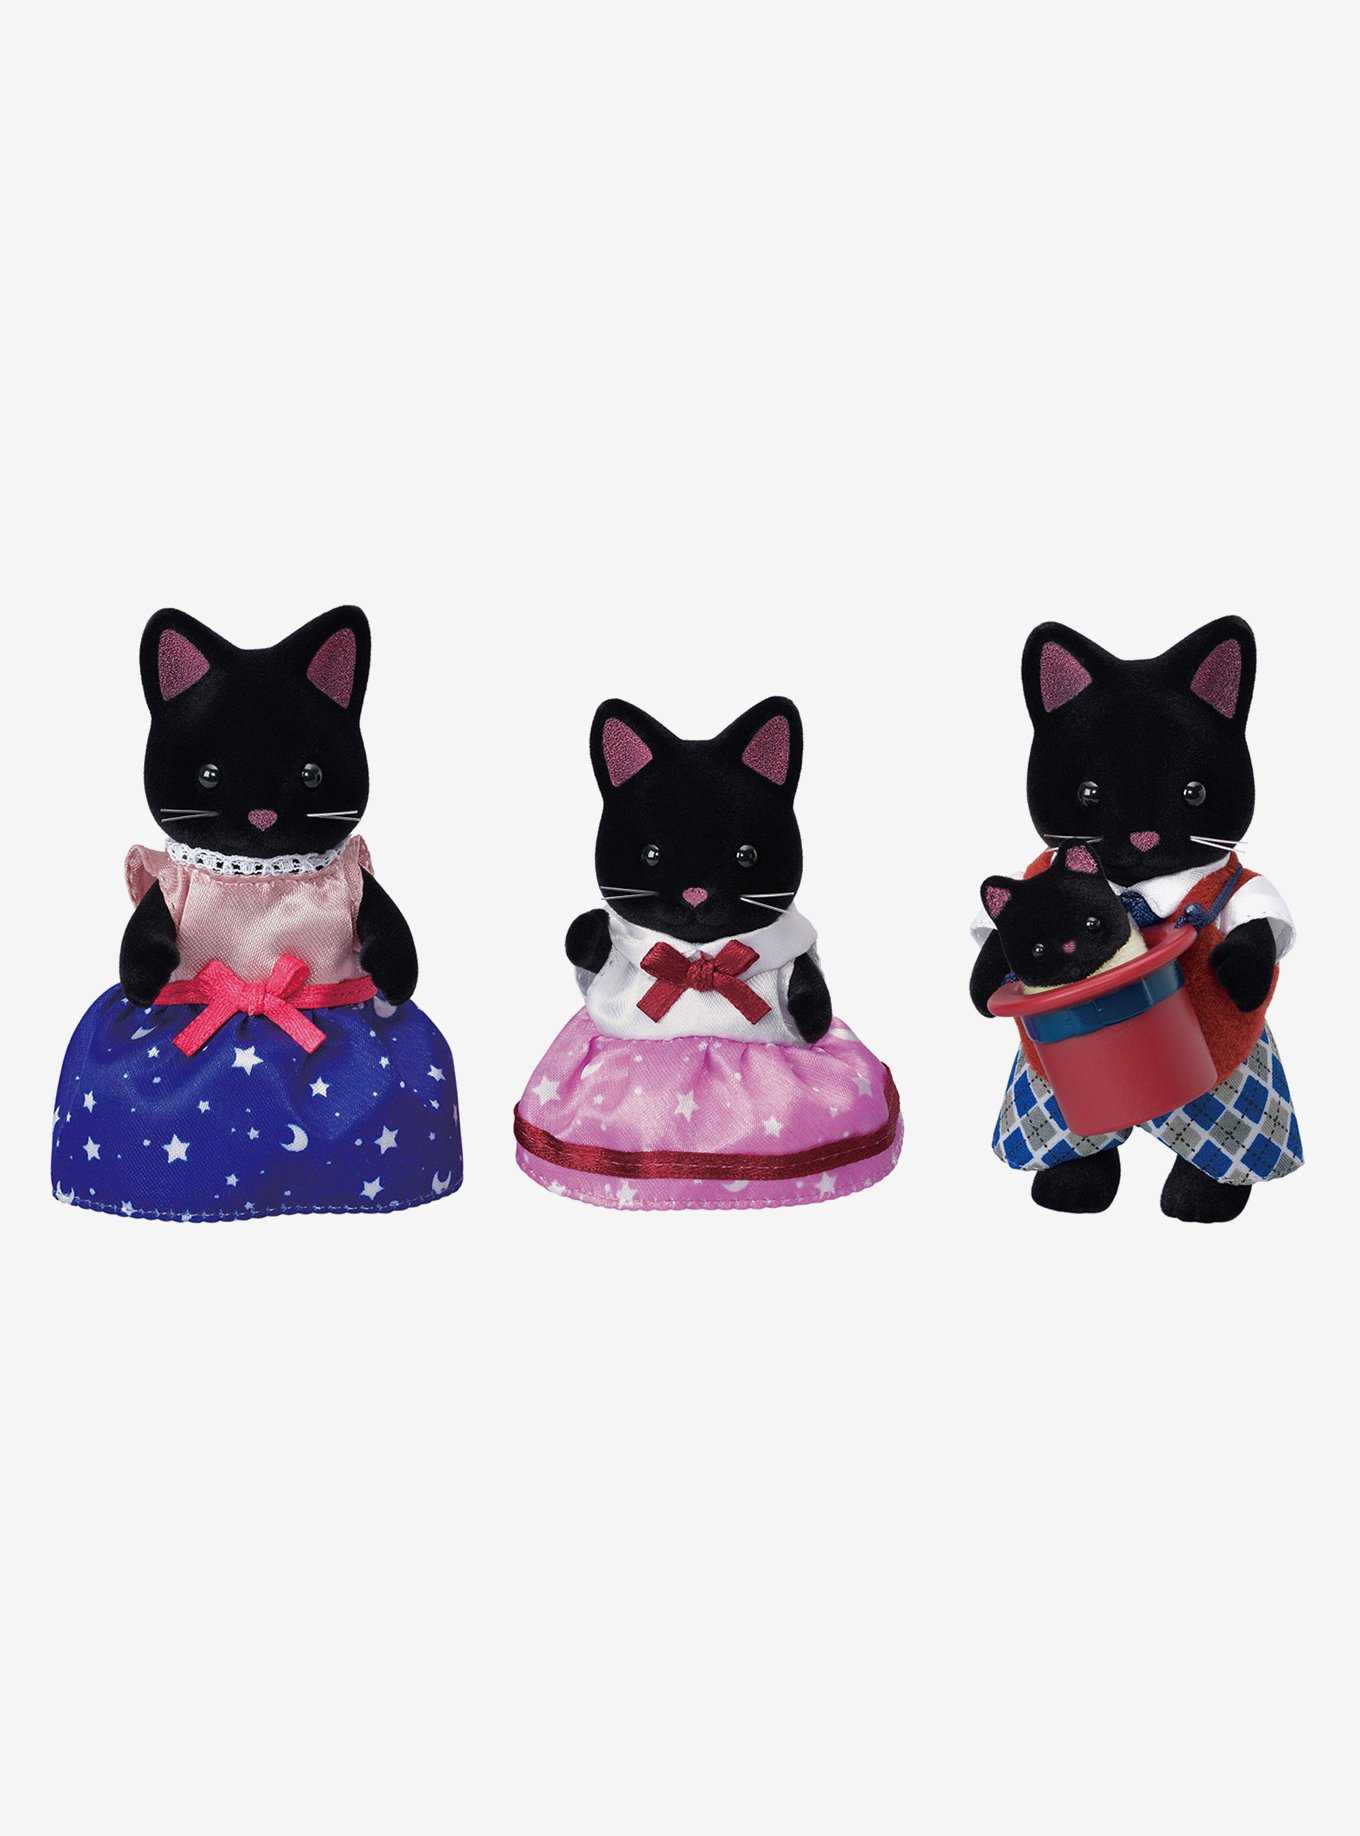 Calico Critters Midnight Cat Family Figure Set, , hi-res